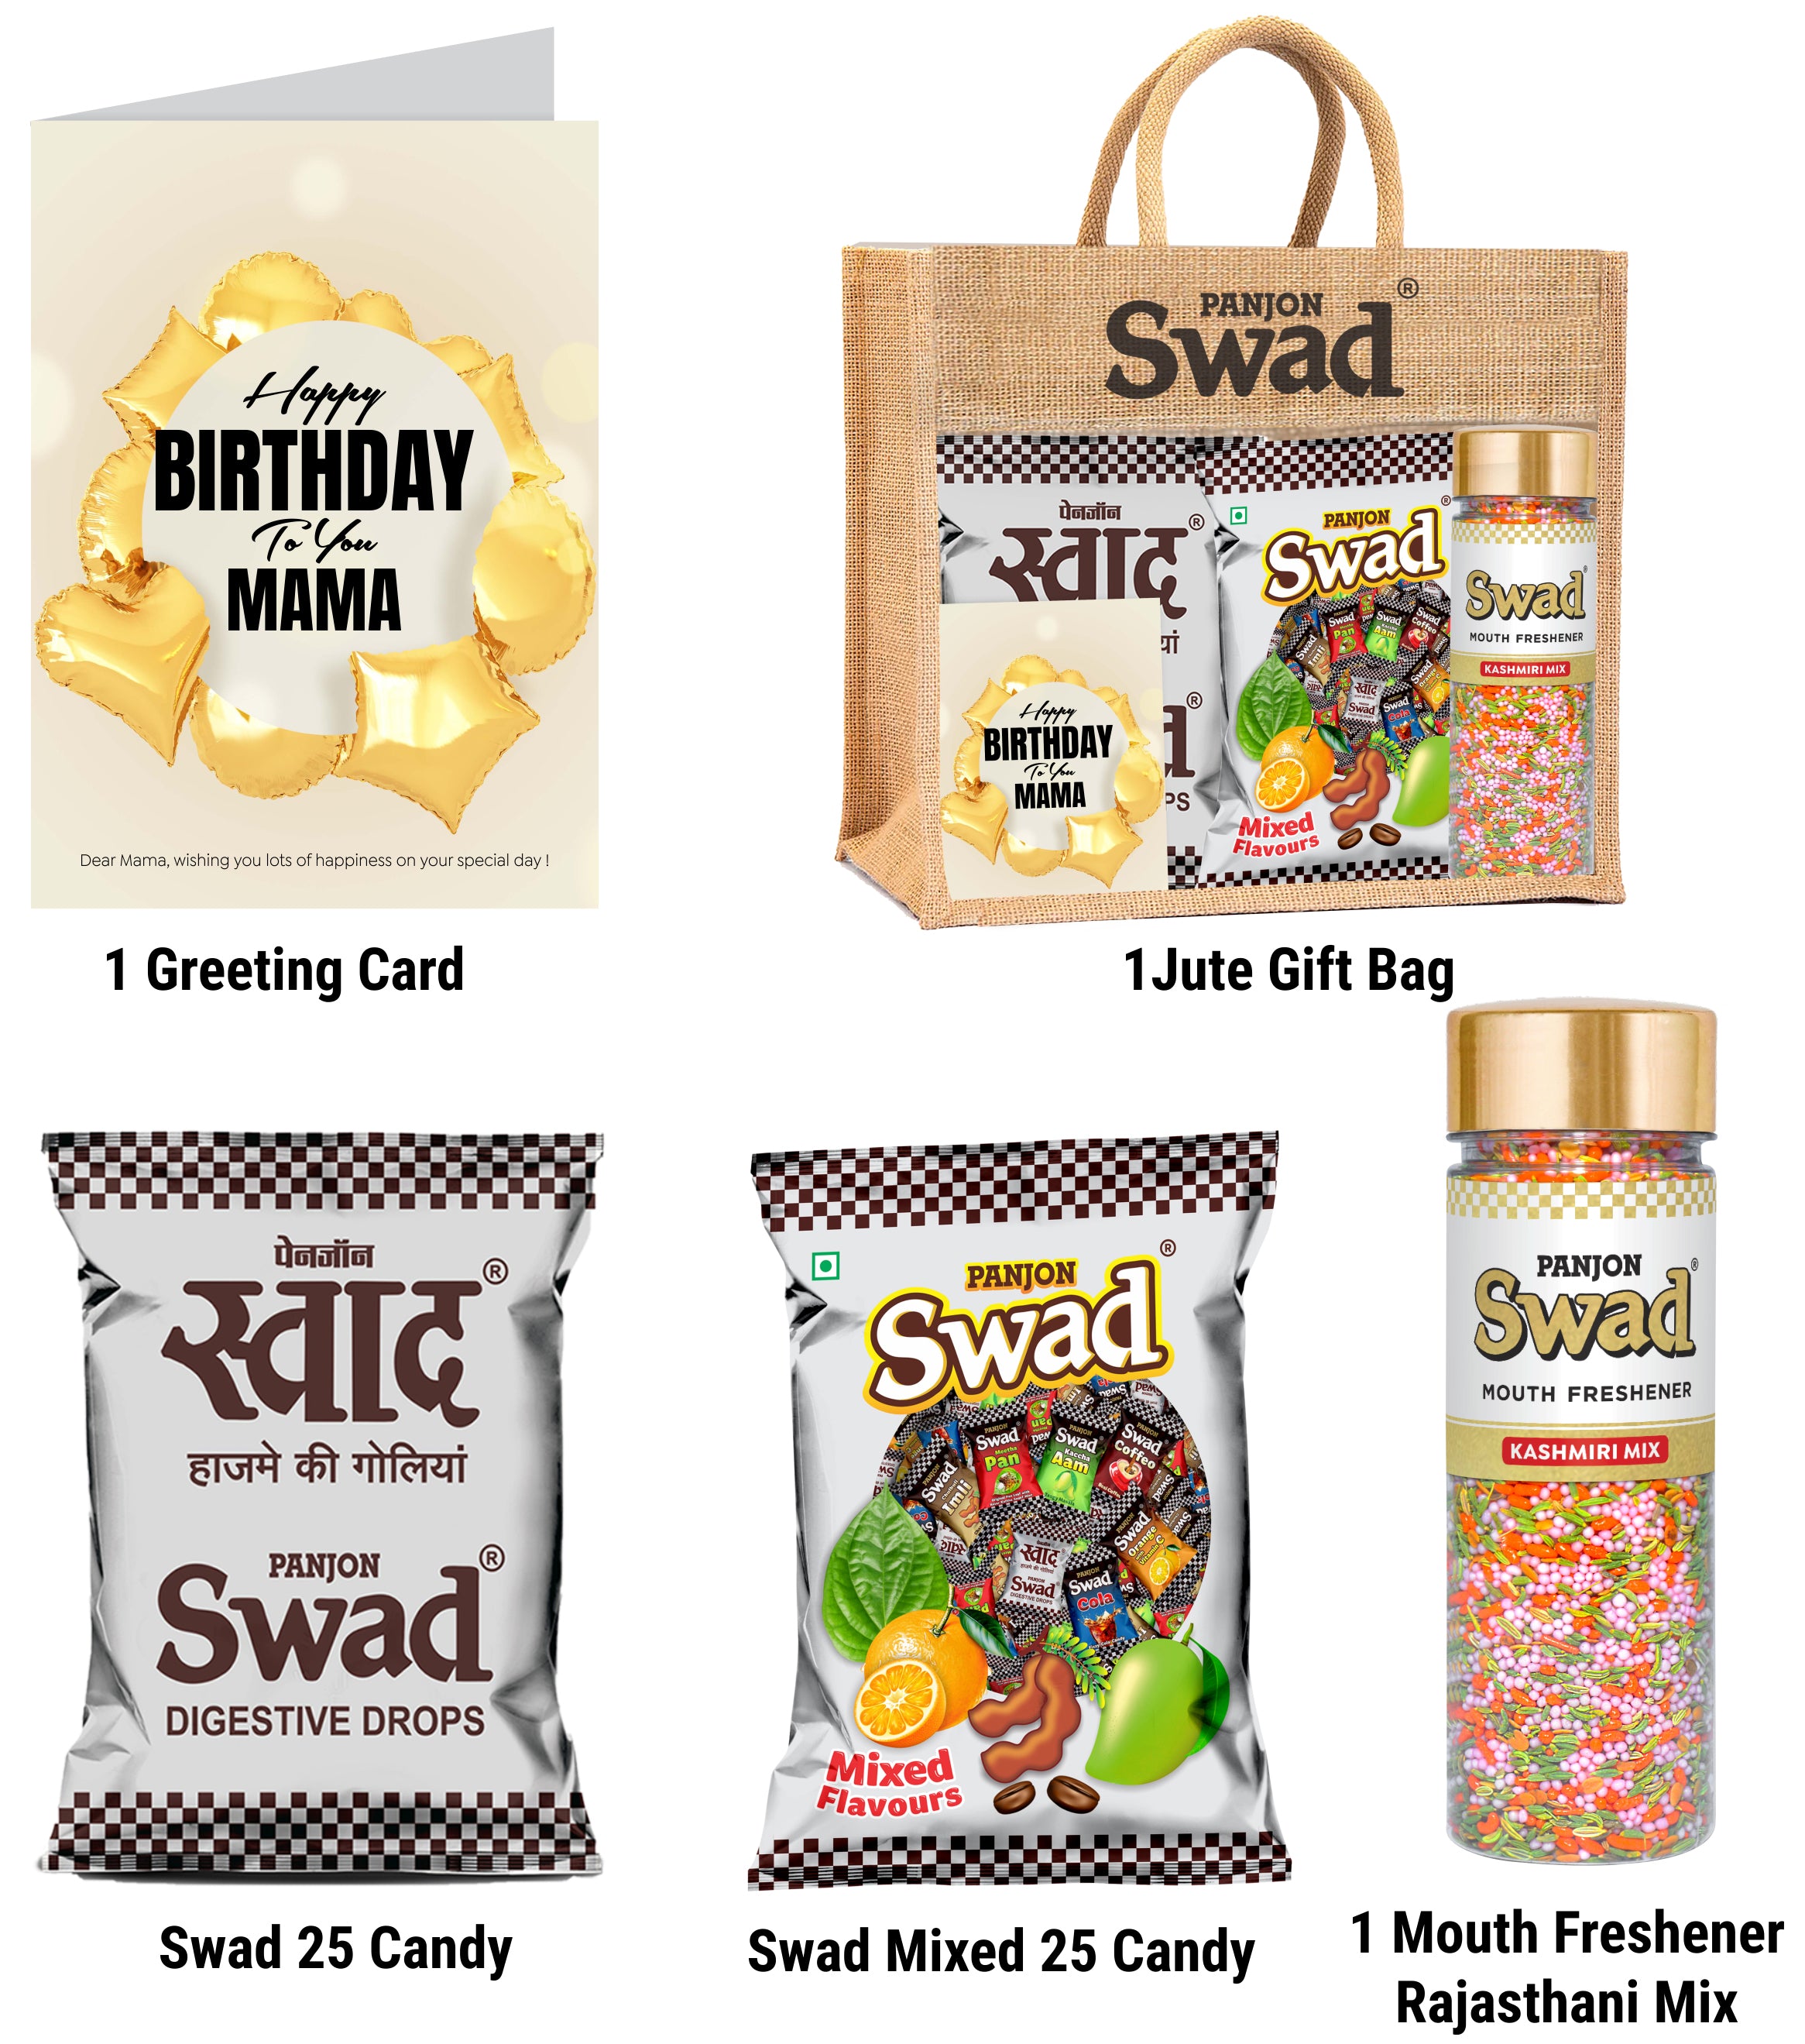 Swad Happy Birthday Mama Gift with Card (25 Swad Candy, 25 Mixed Toffee, Kashmiri Mix Mukhwas) in Jute Bag